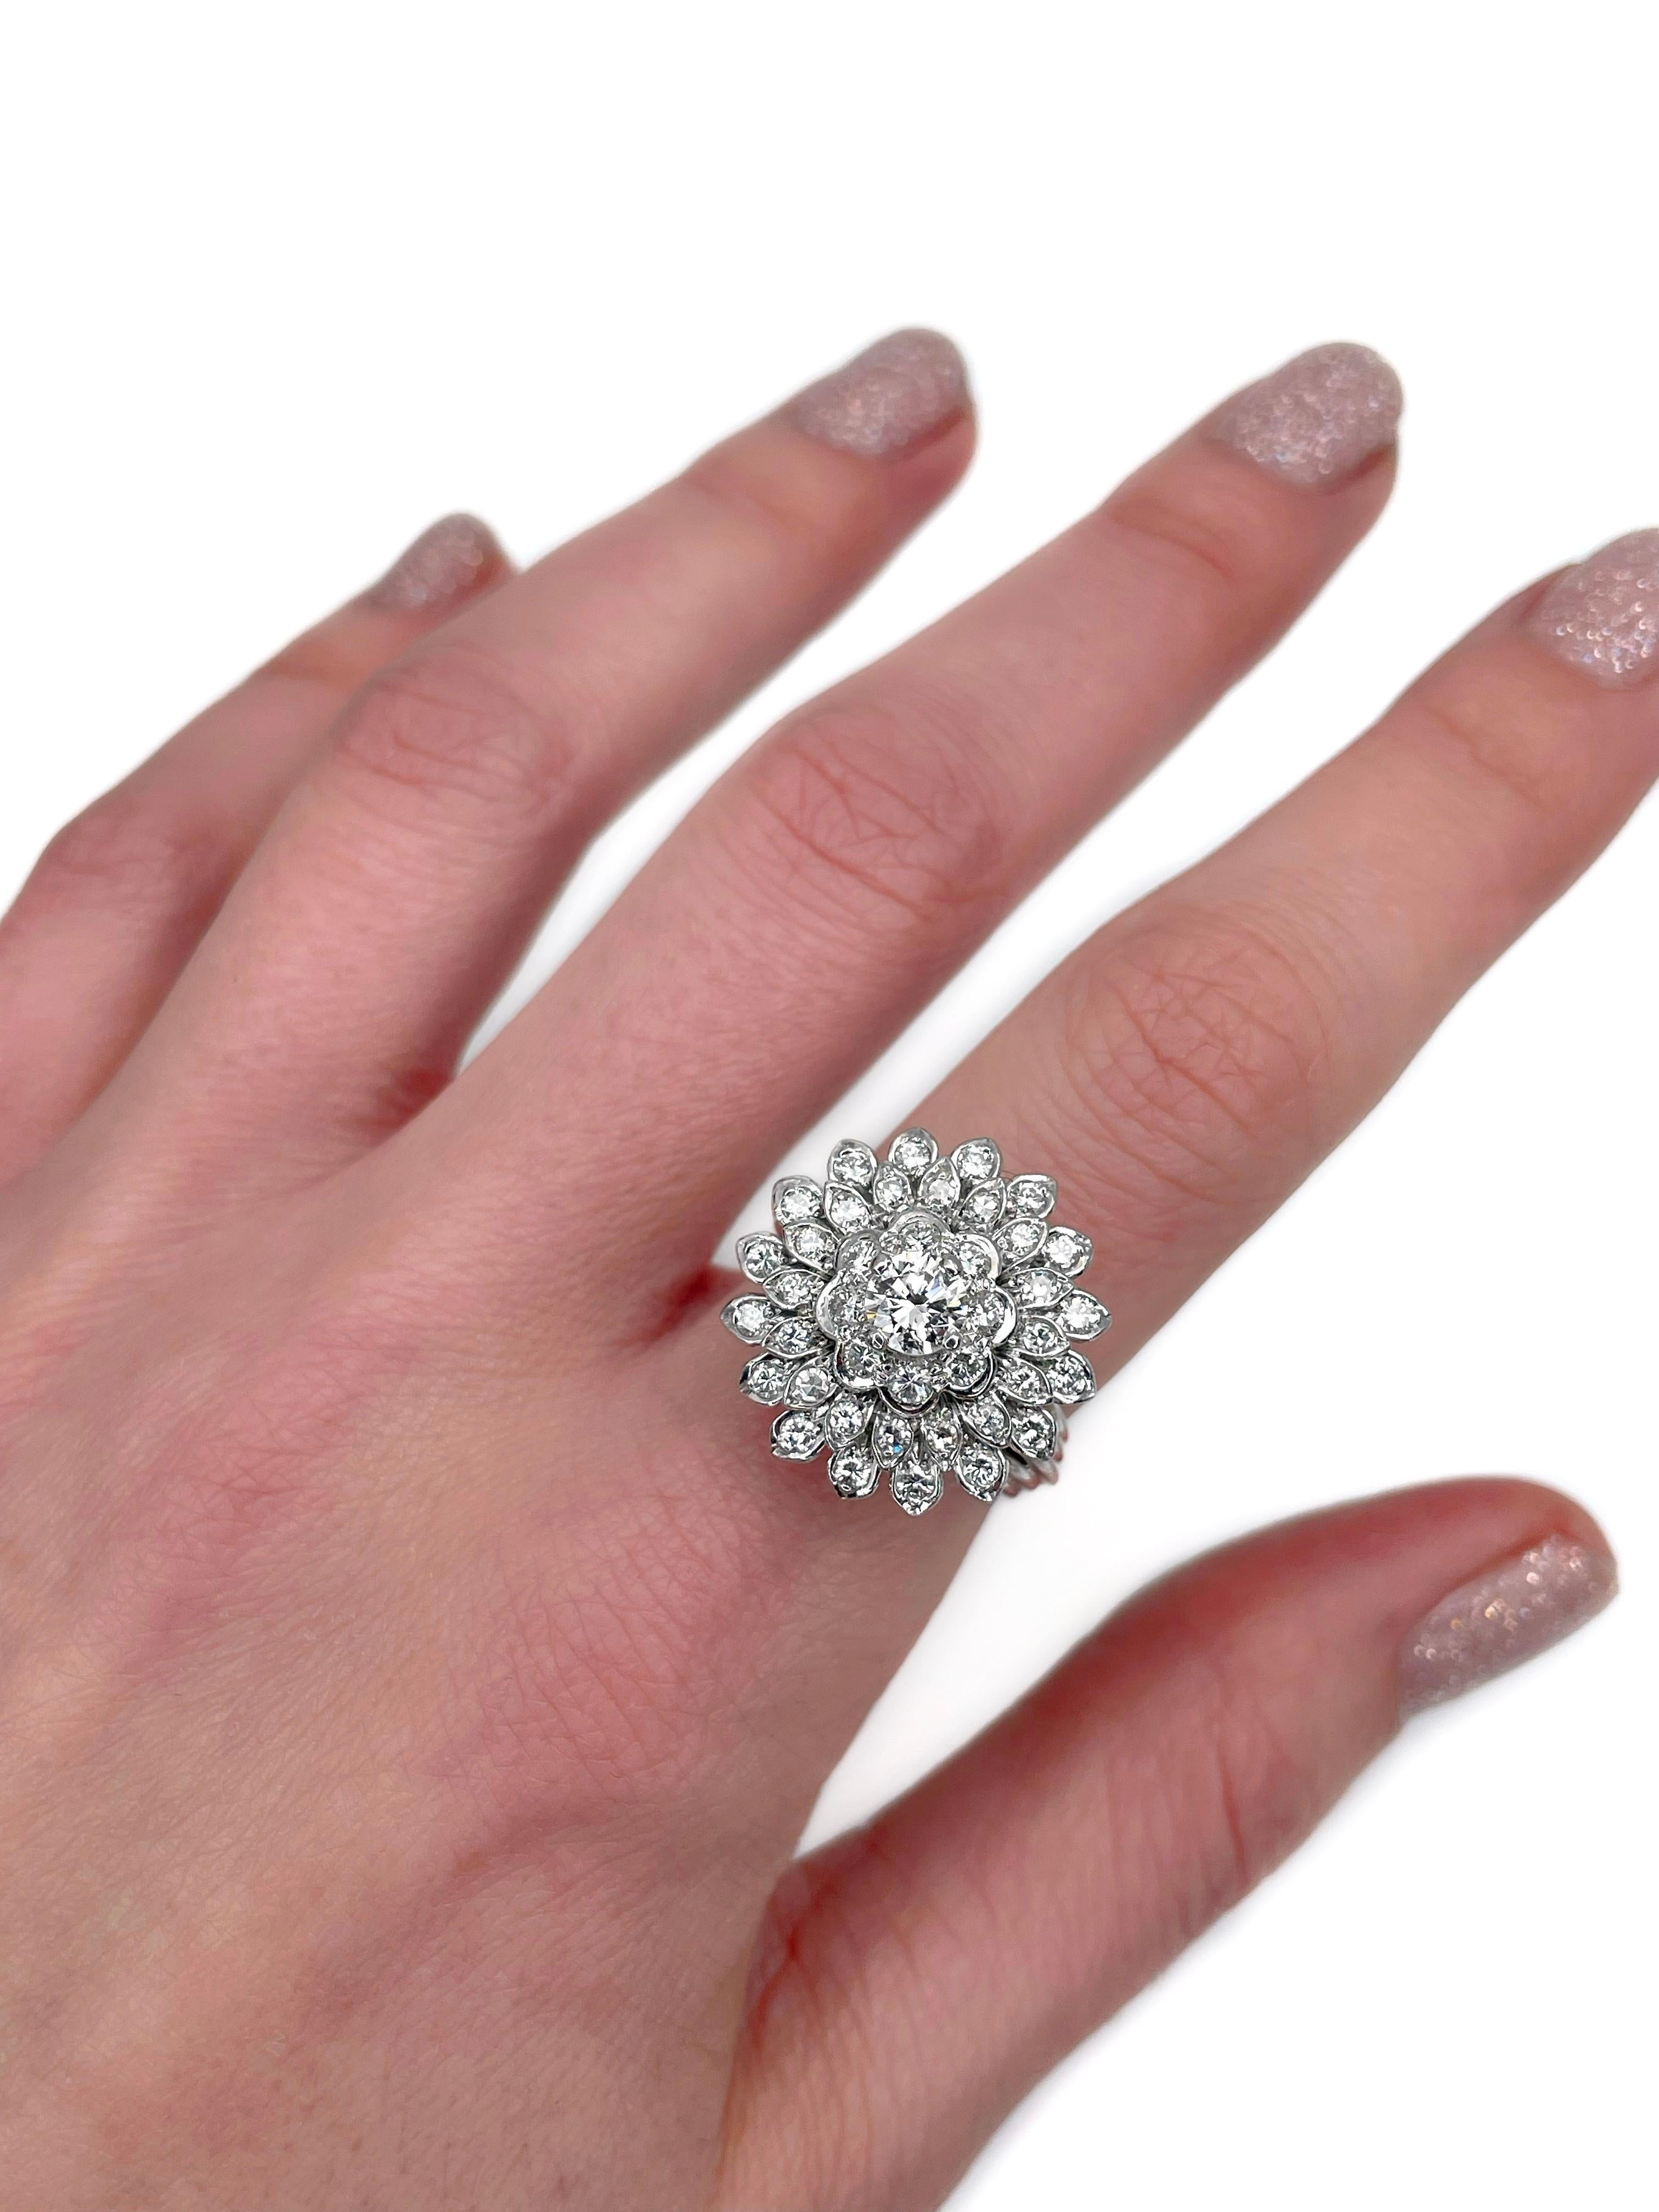 This is a vintage cocktail ring crafted in 14K white gold. Circa 1980.

 It features diamonds (TW 1.27ct):
- 1pc., brilliant cut, 0.45ct, RW, VS2
- 8pcs.,  RBC-17, TW 0.12ct, RW+/RW, VS-SI
- 32pcs., brilliant cut, TW 0.70ct, RW+/RW, VS-SI

Weight: